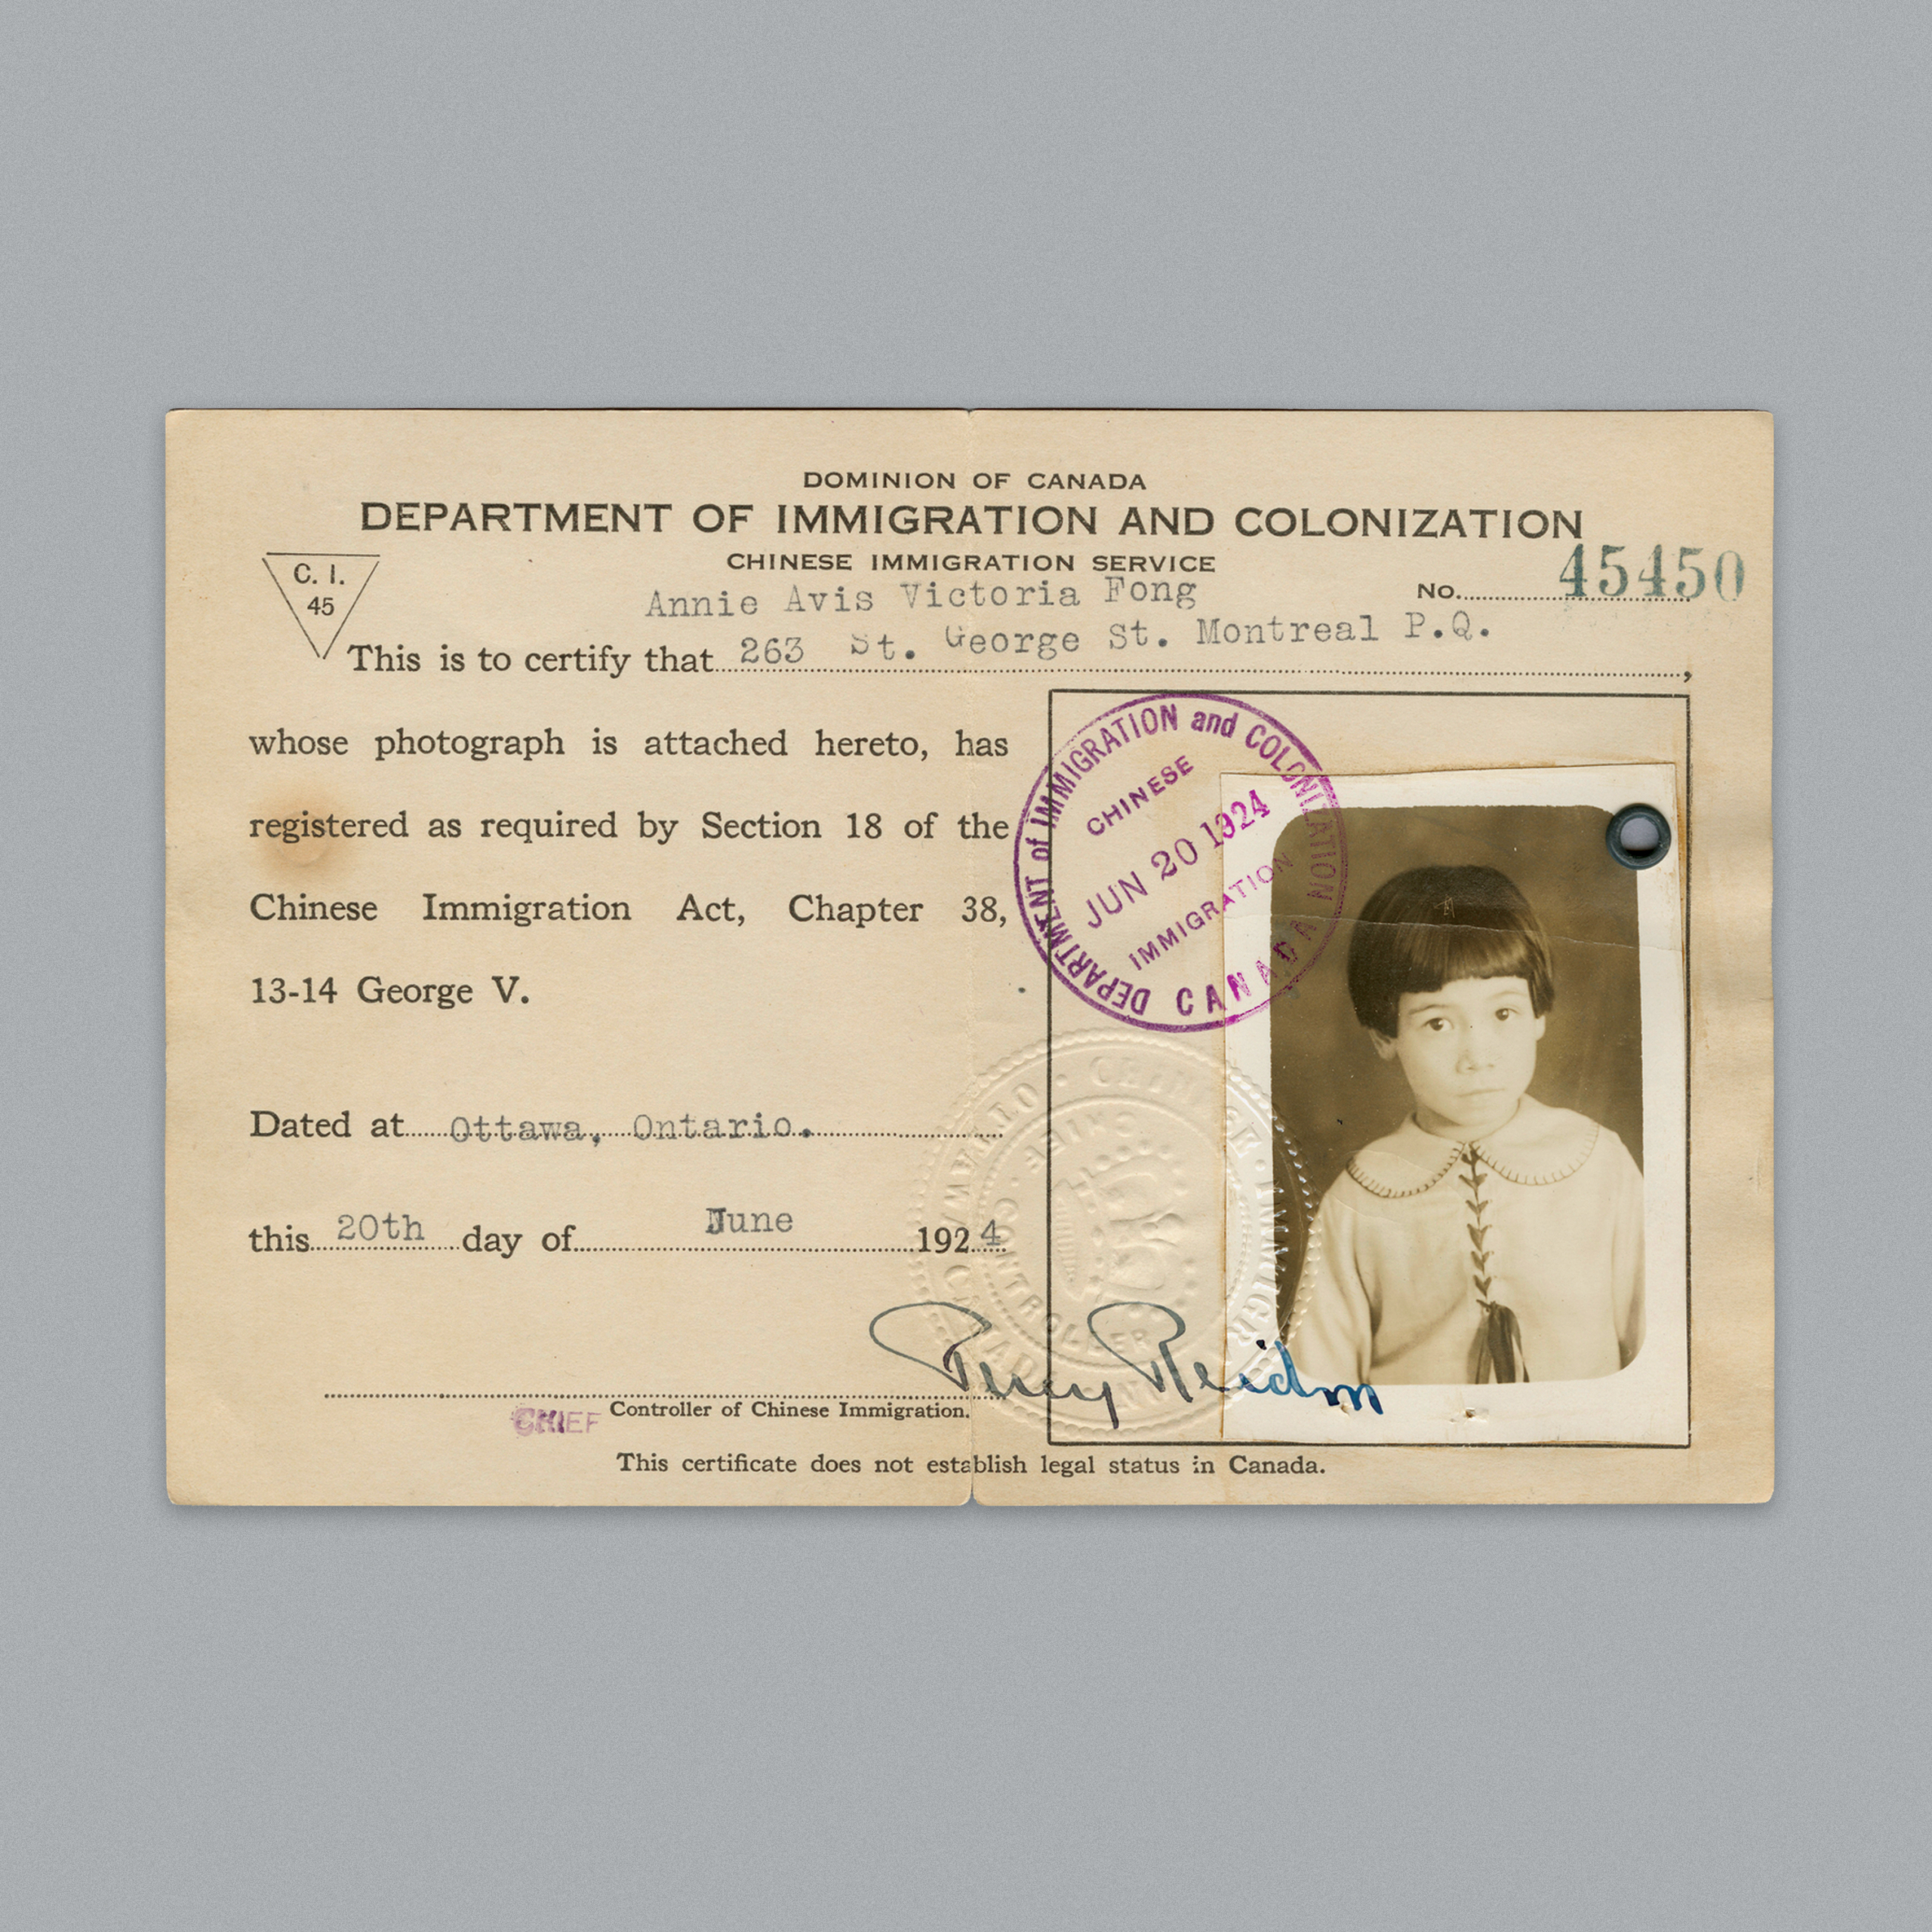 Department of Immigration and Colonization card for Ann Fong